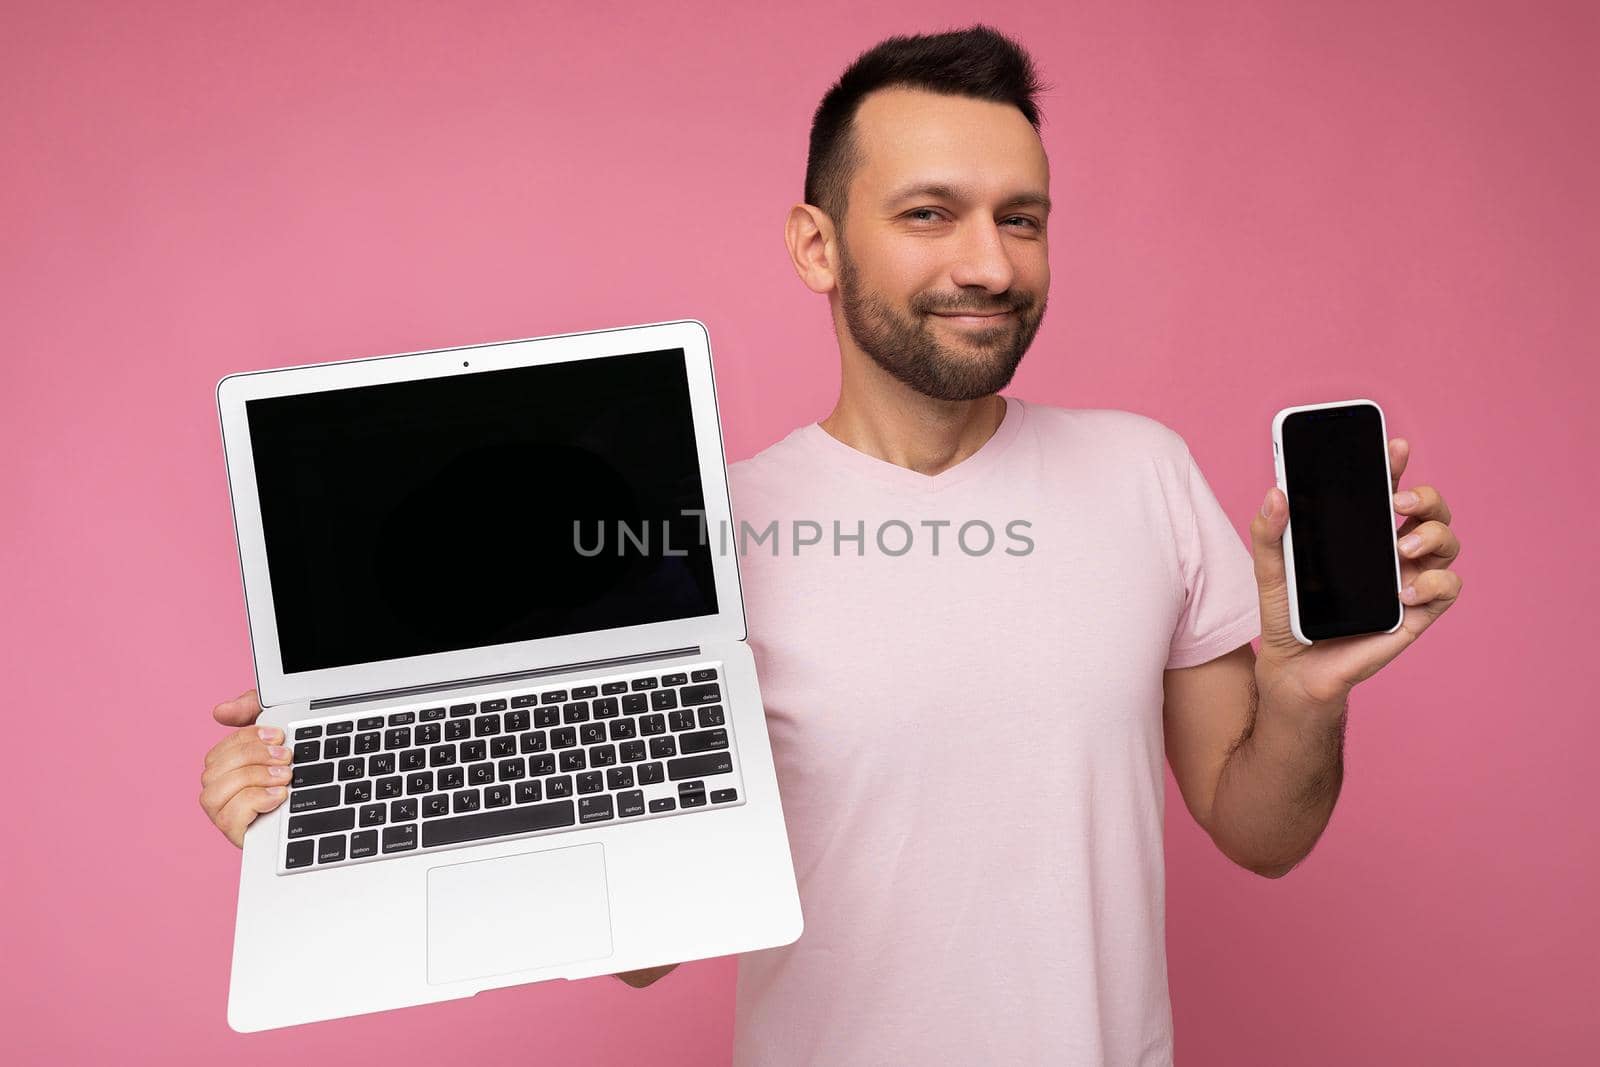 Handsome man holding laptop computer and mobile phone fishily looking at camera in t-shirt on isolated pink background by TRMK